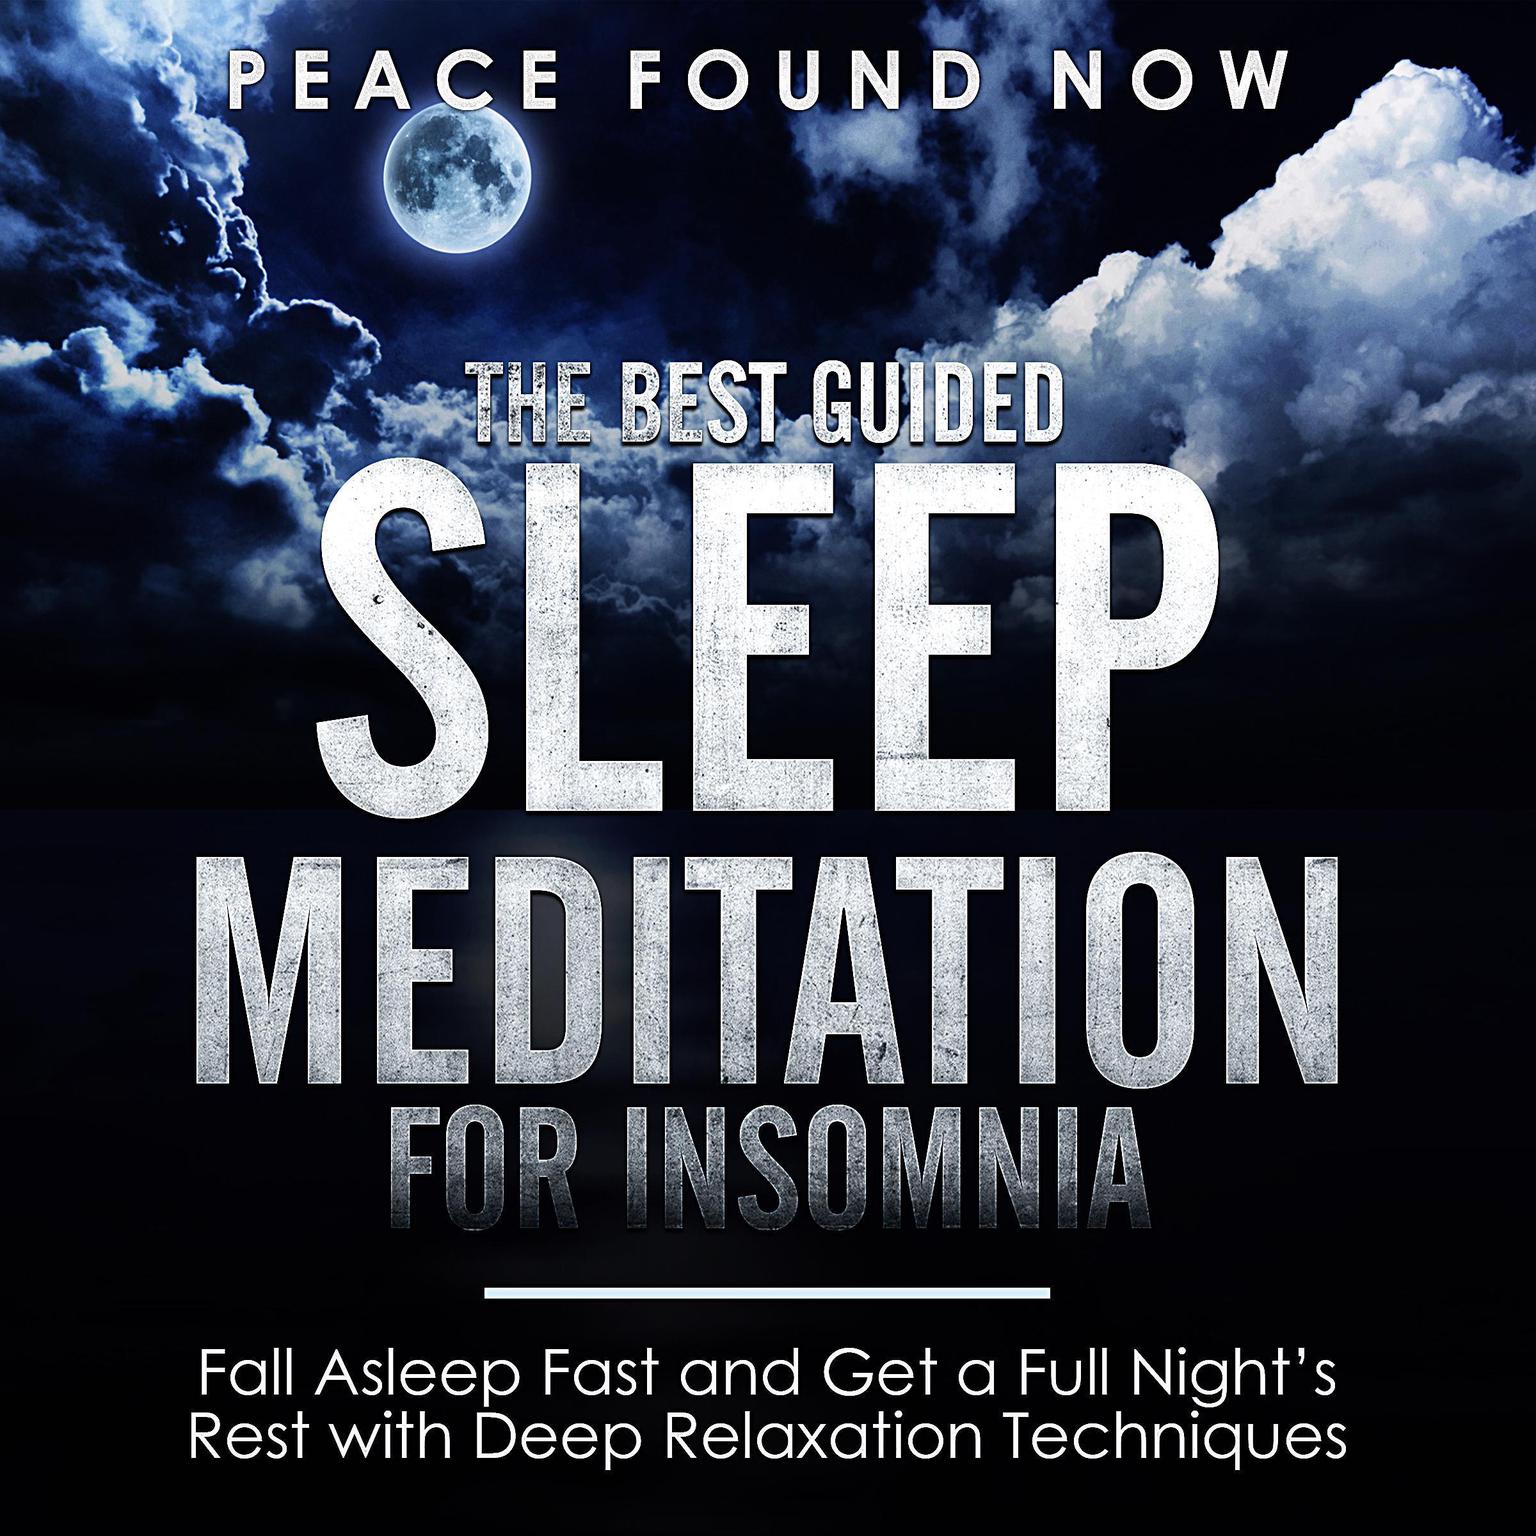 The Best Guided Sleep Meditation for Insomnia: Fall Asleep Fast and Get a Full Night’s Rest with Deep Relaxation Techniques: Fall Asleep Fast and Get a Full Night’s Rest with Deep Relaxation Techniques Audiobook, by Peace Found Now